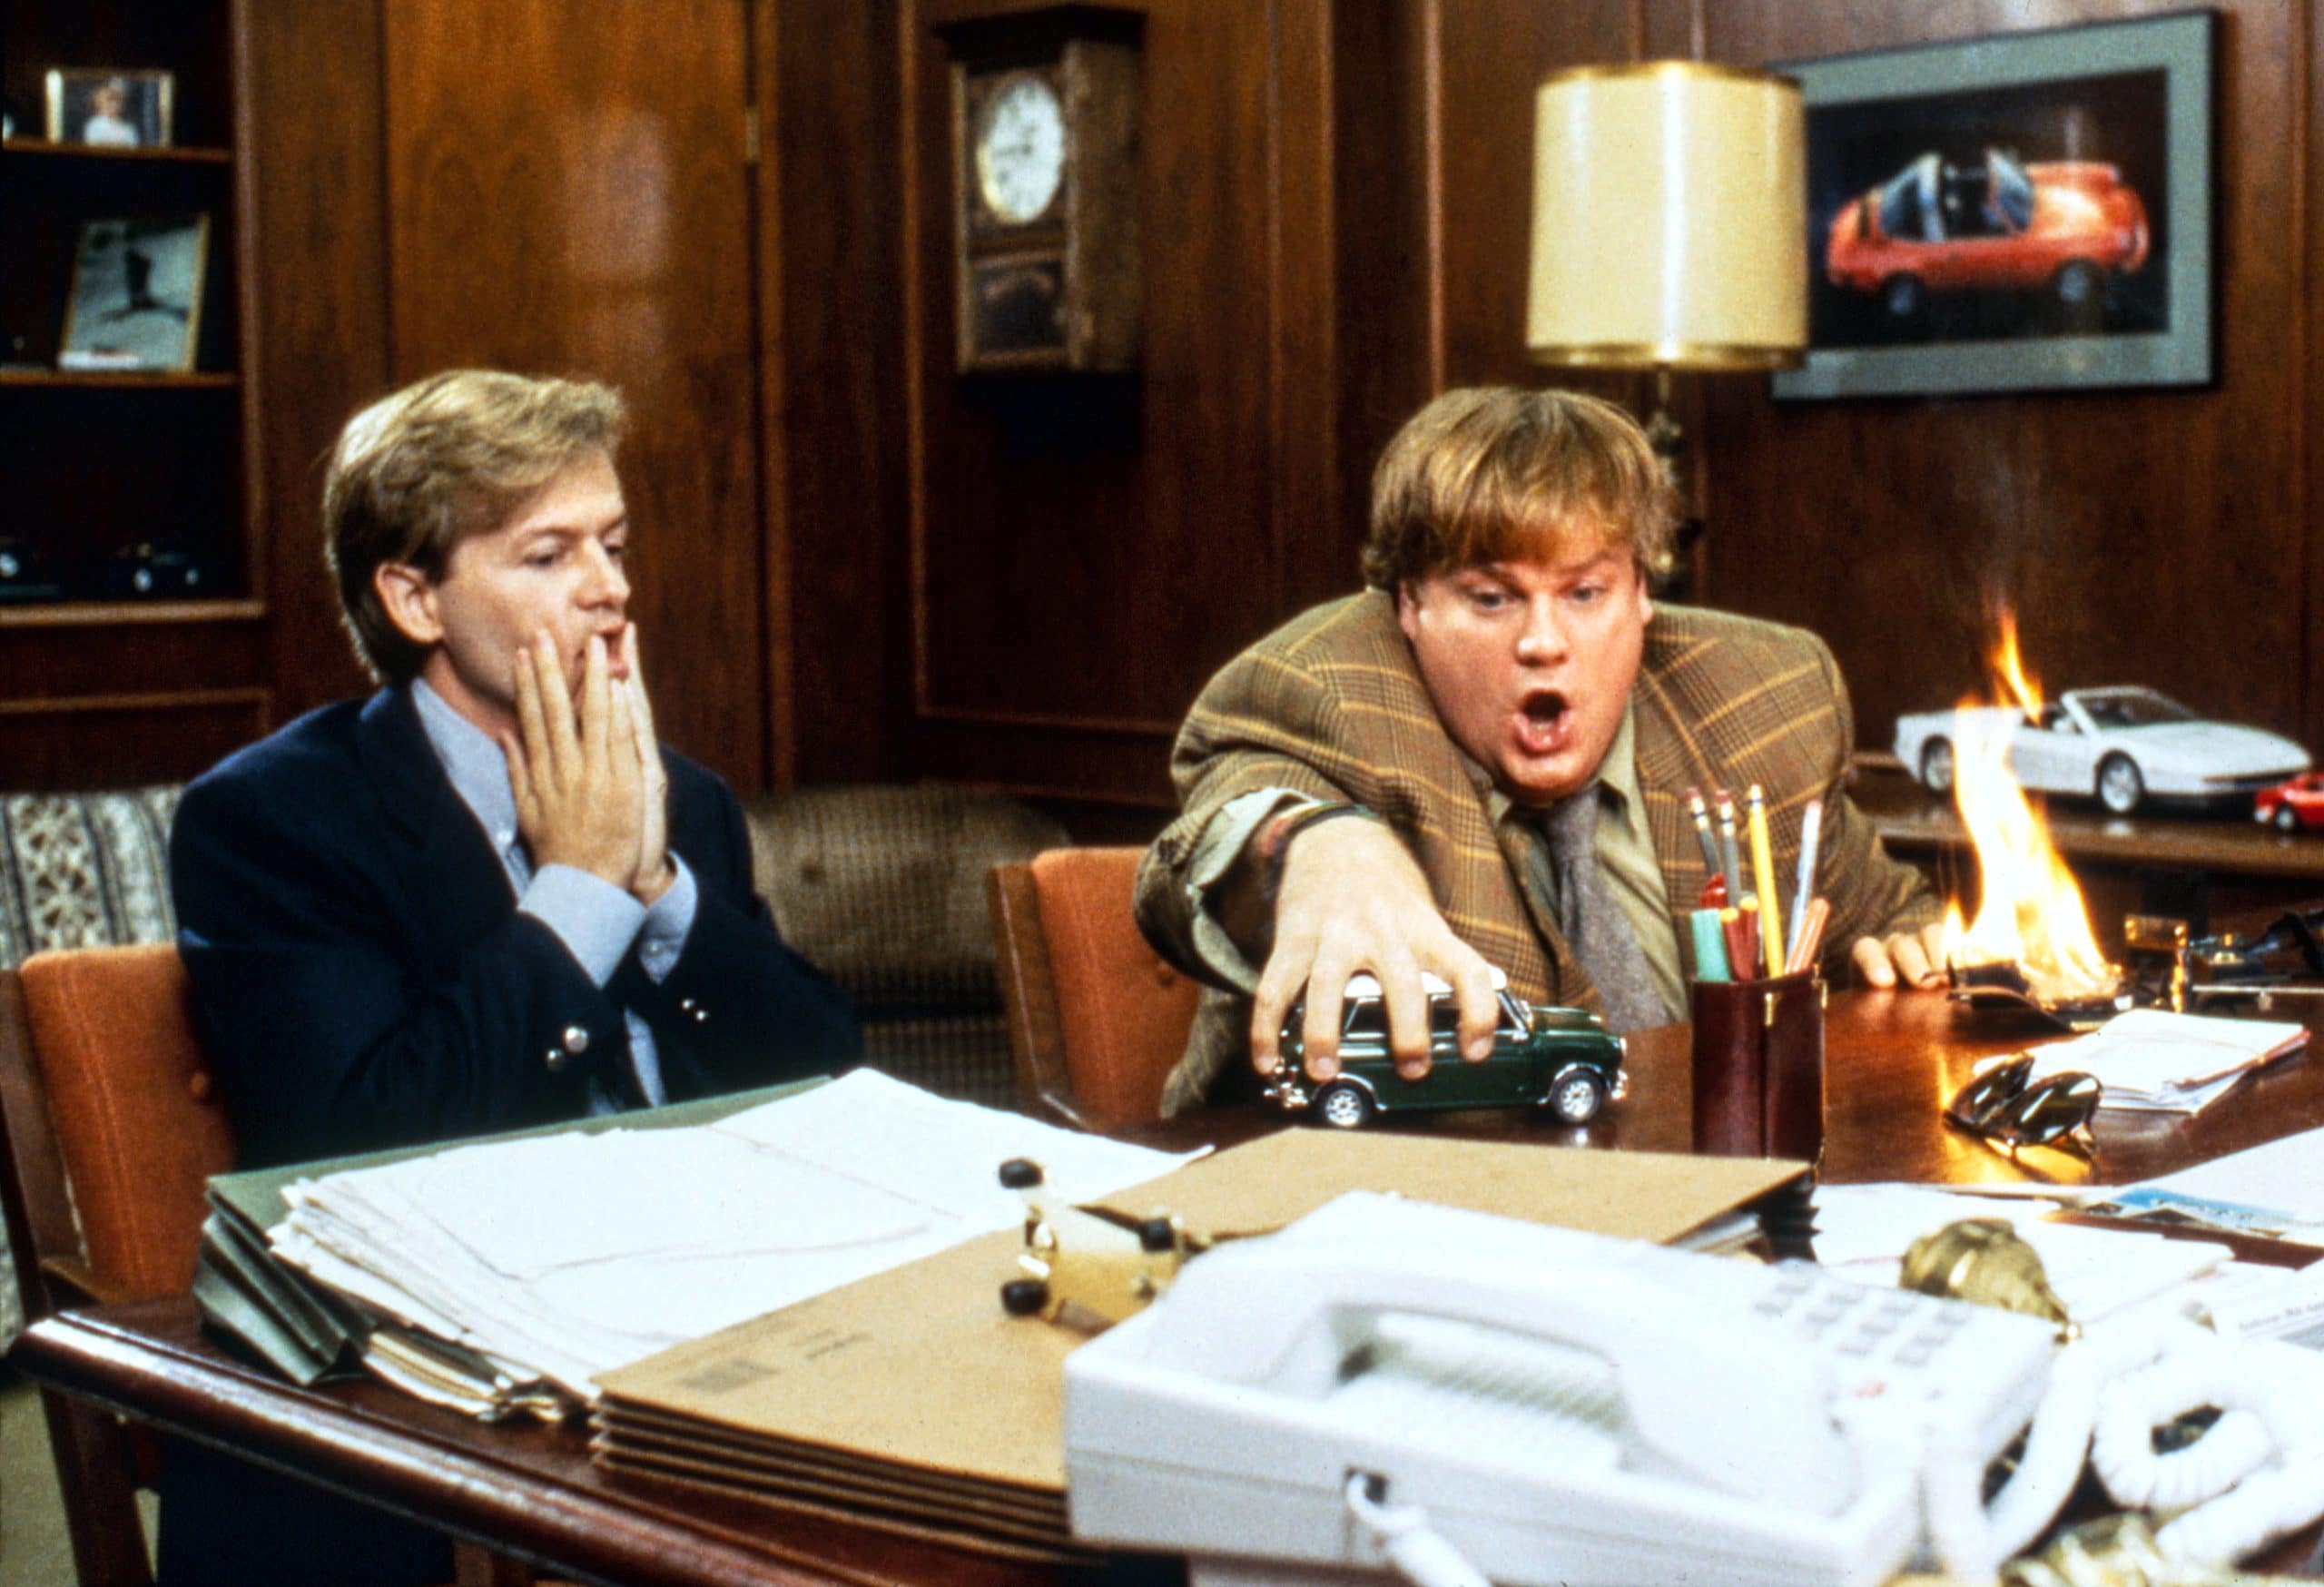 David Space and Chris Farley tommy boy